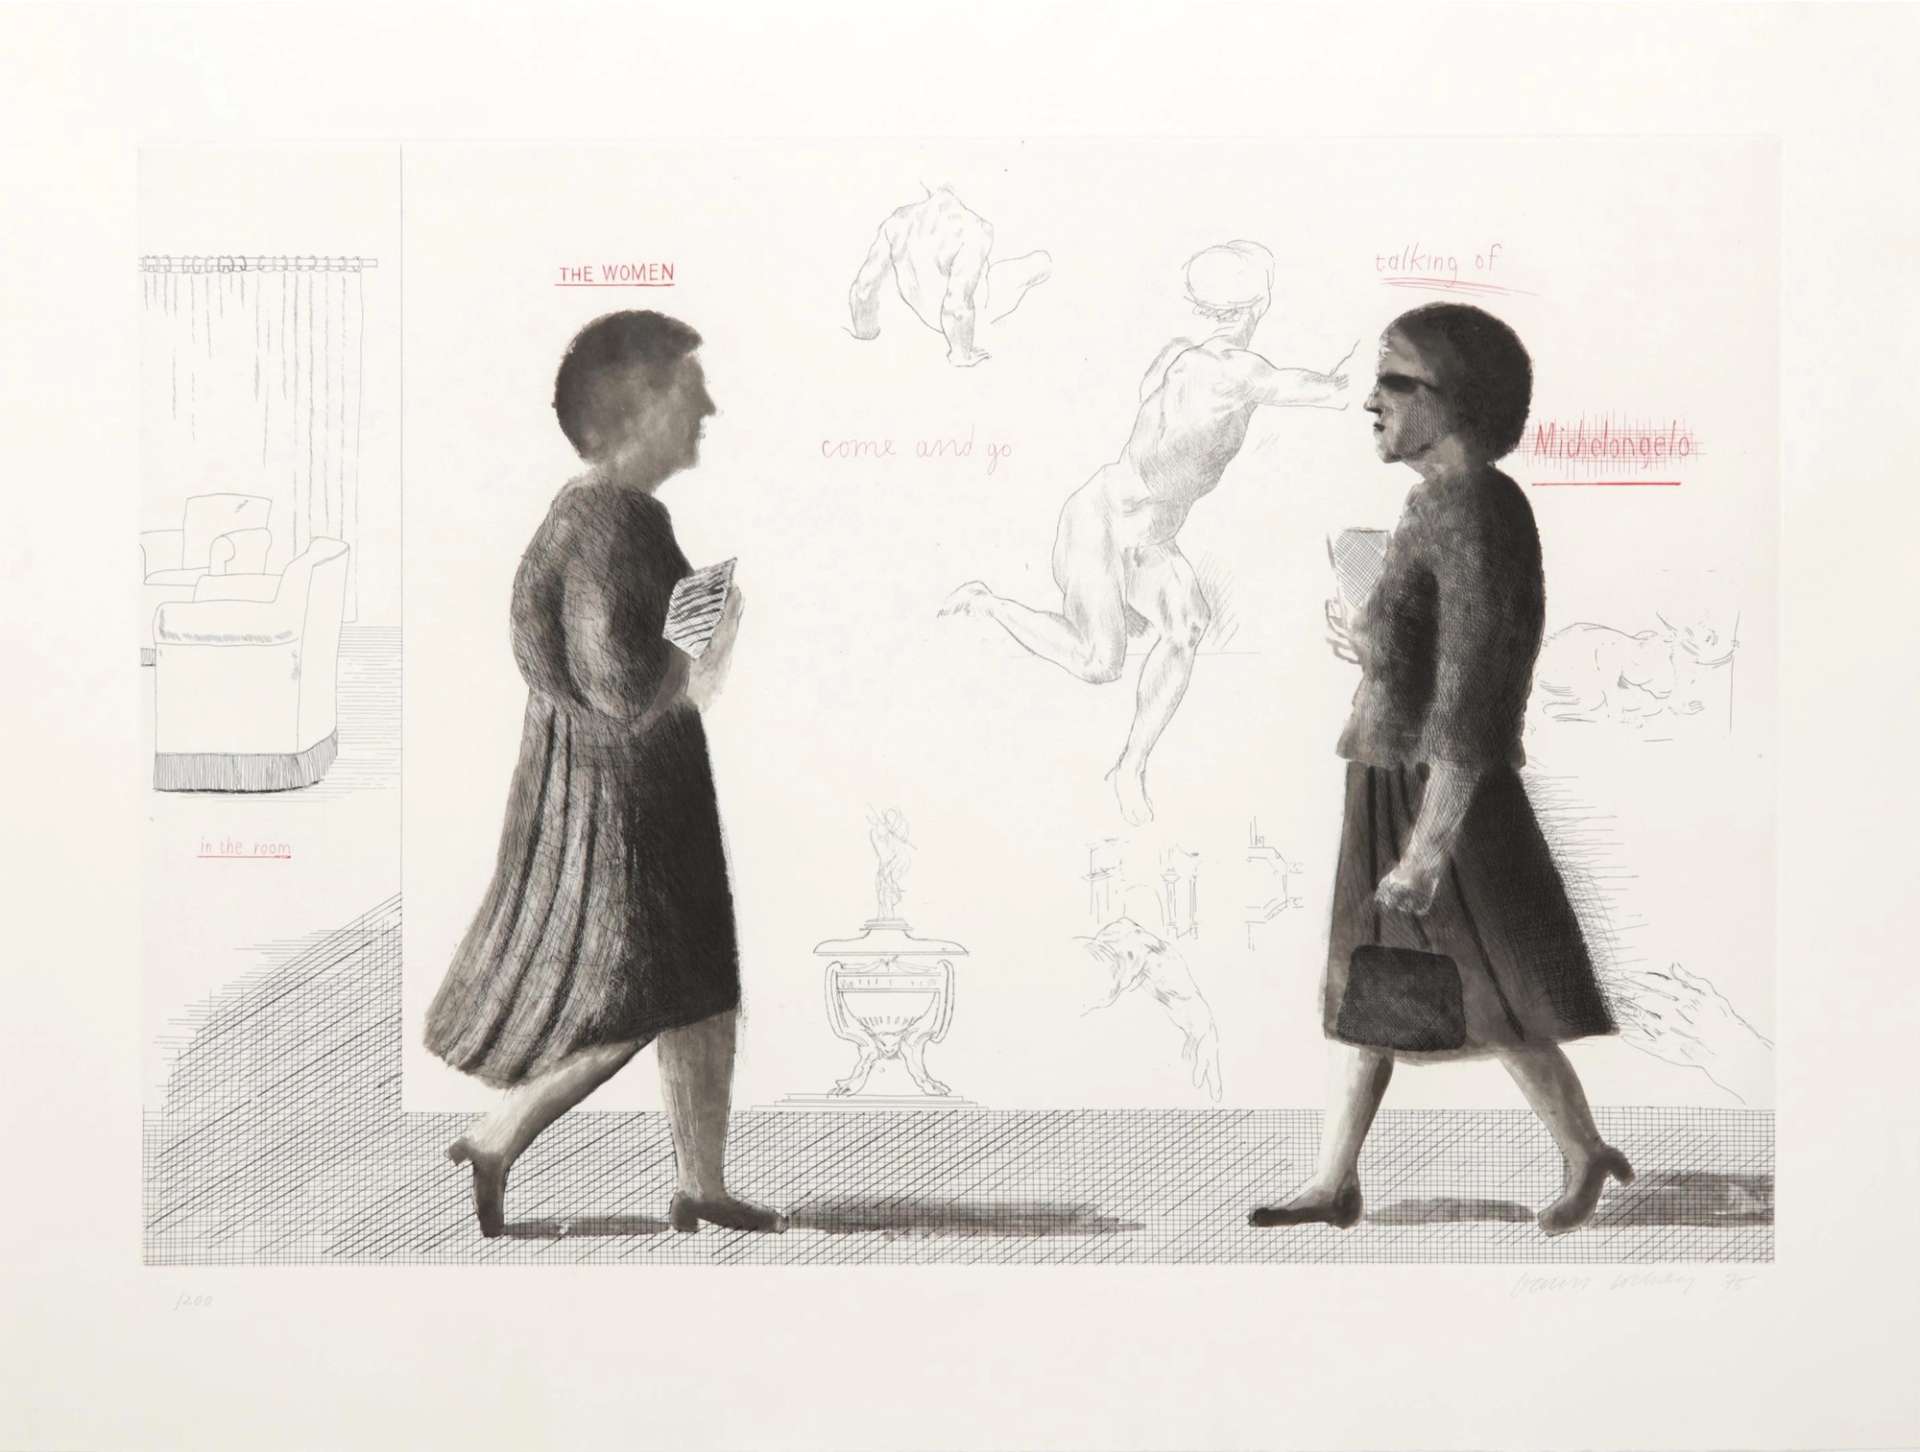 This print depicts two women as they walk towards one another, clutching a newspaper and a handbag, respectively. Behind the women, studies of works by Italian High Renaissance artist, Michelangelo, have been gesturally inscribed into an un-inked area resembling a wall, which engenders a stark light-dark contrast with the pair’s drab clothes. Literary references permeate the print, with the words ‘in the room’ and ‘THE WOMEN come and go talking of Michelangelo’ appearing on the wall in a coded reference to T.S. Eliot’.